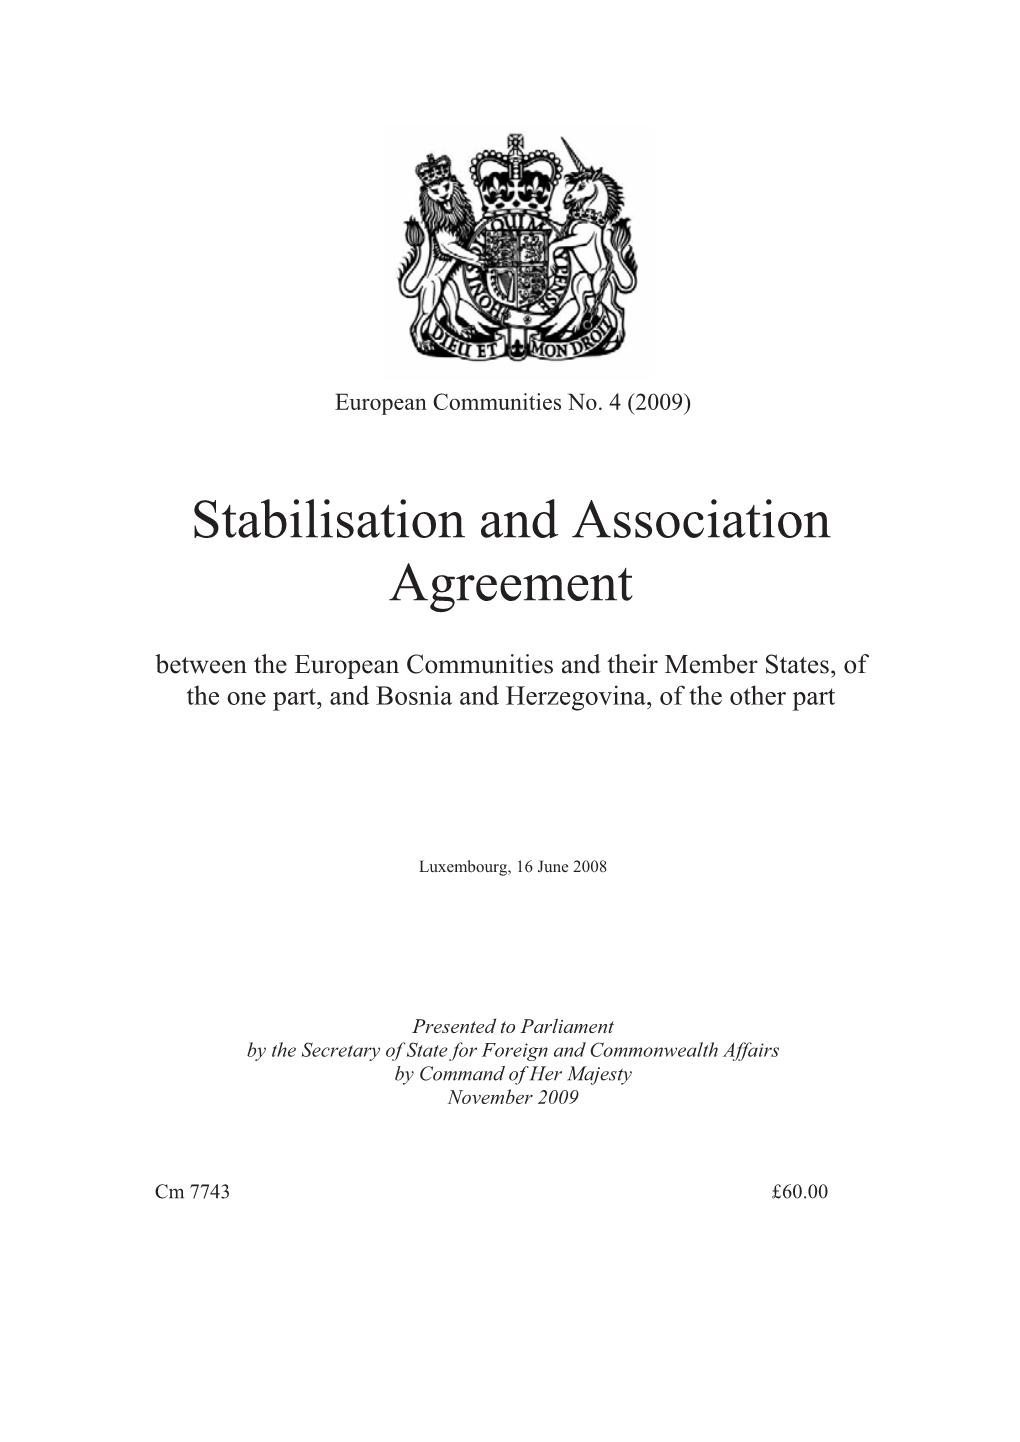 Stabilisation and Association Agreement Between the European Communities and Their Member States, of the One Part, and Bosnia and Herzegovina, of the Other Part